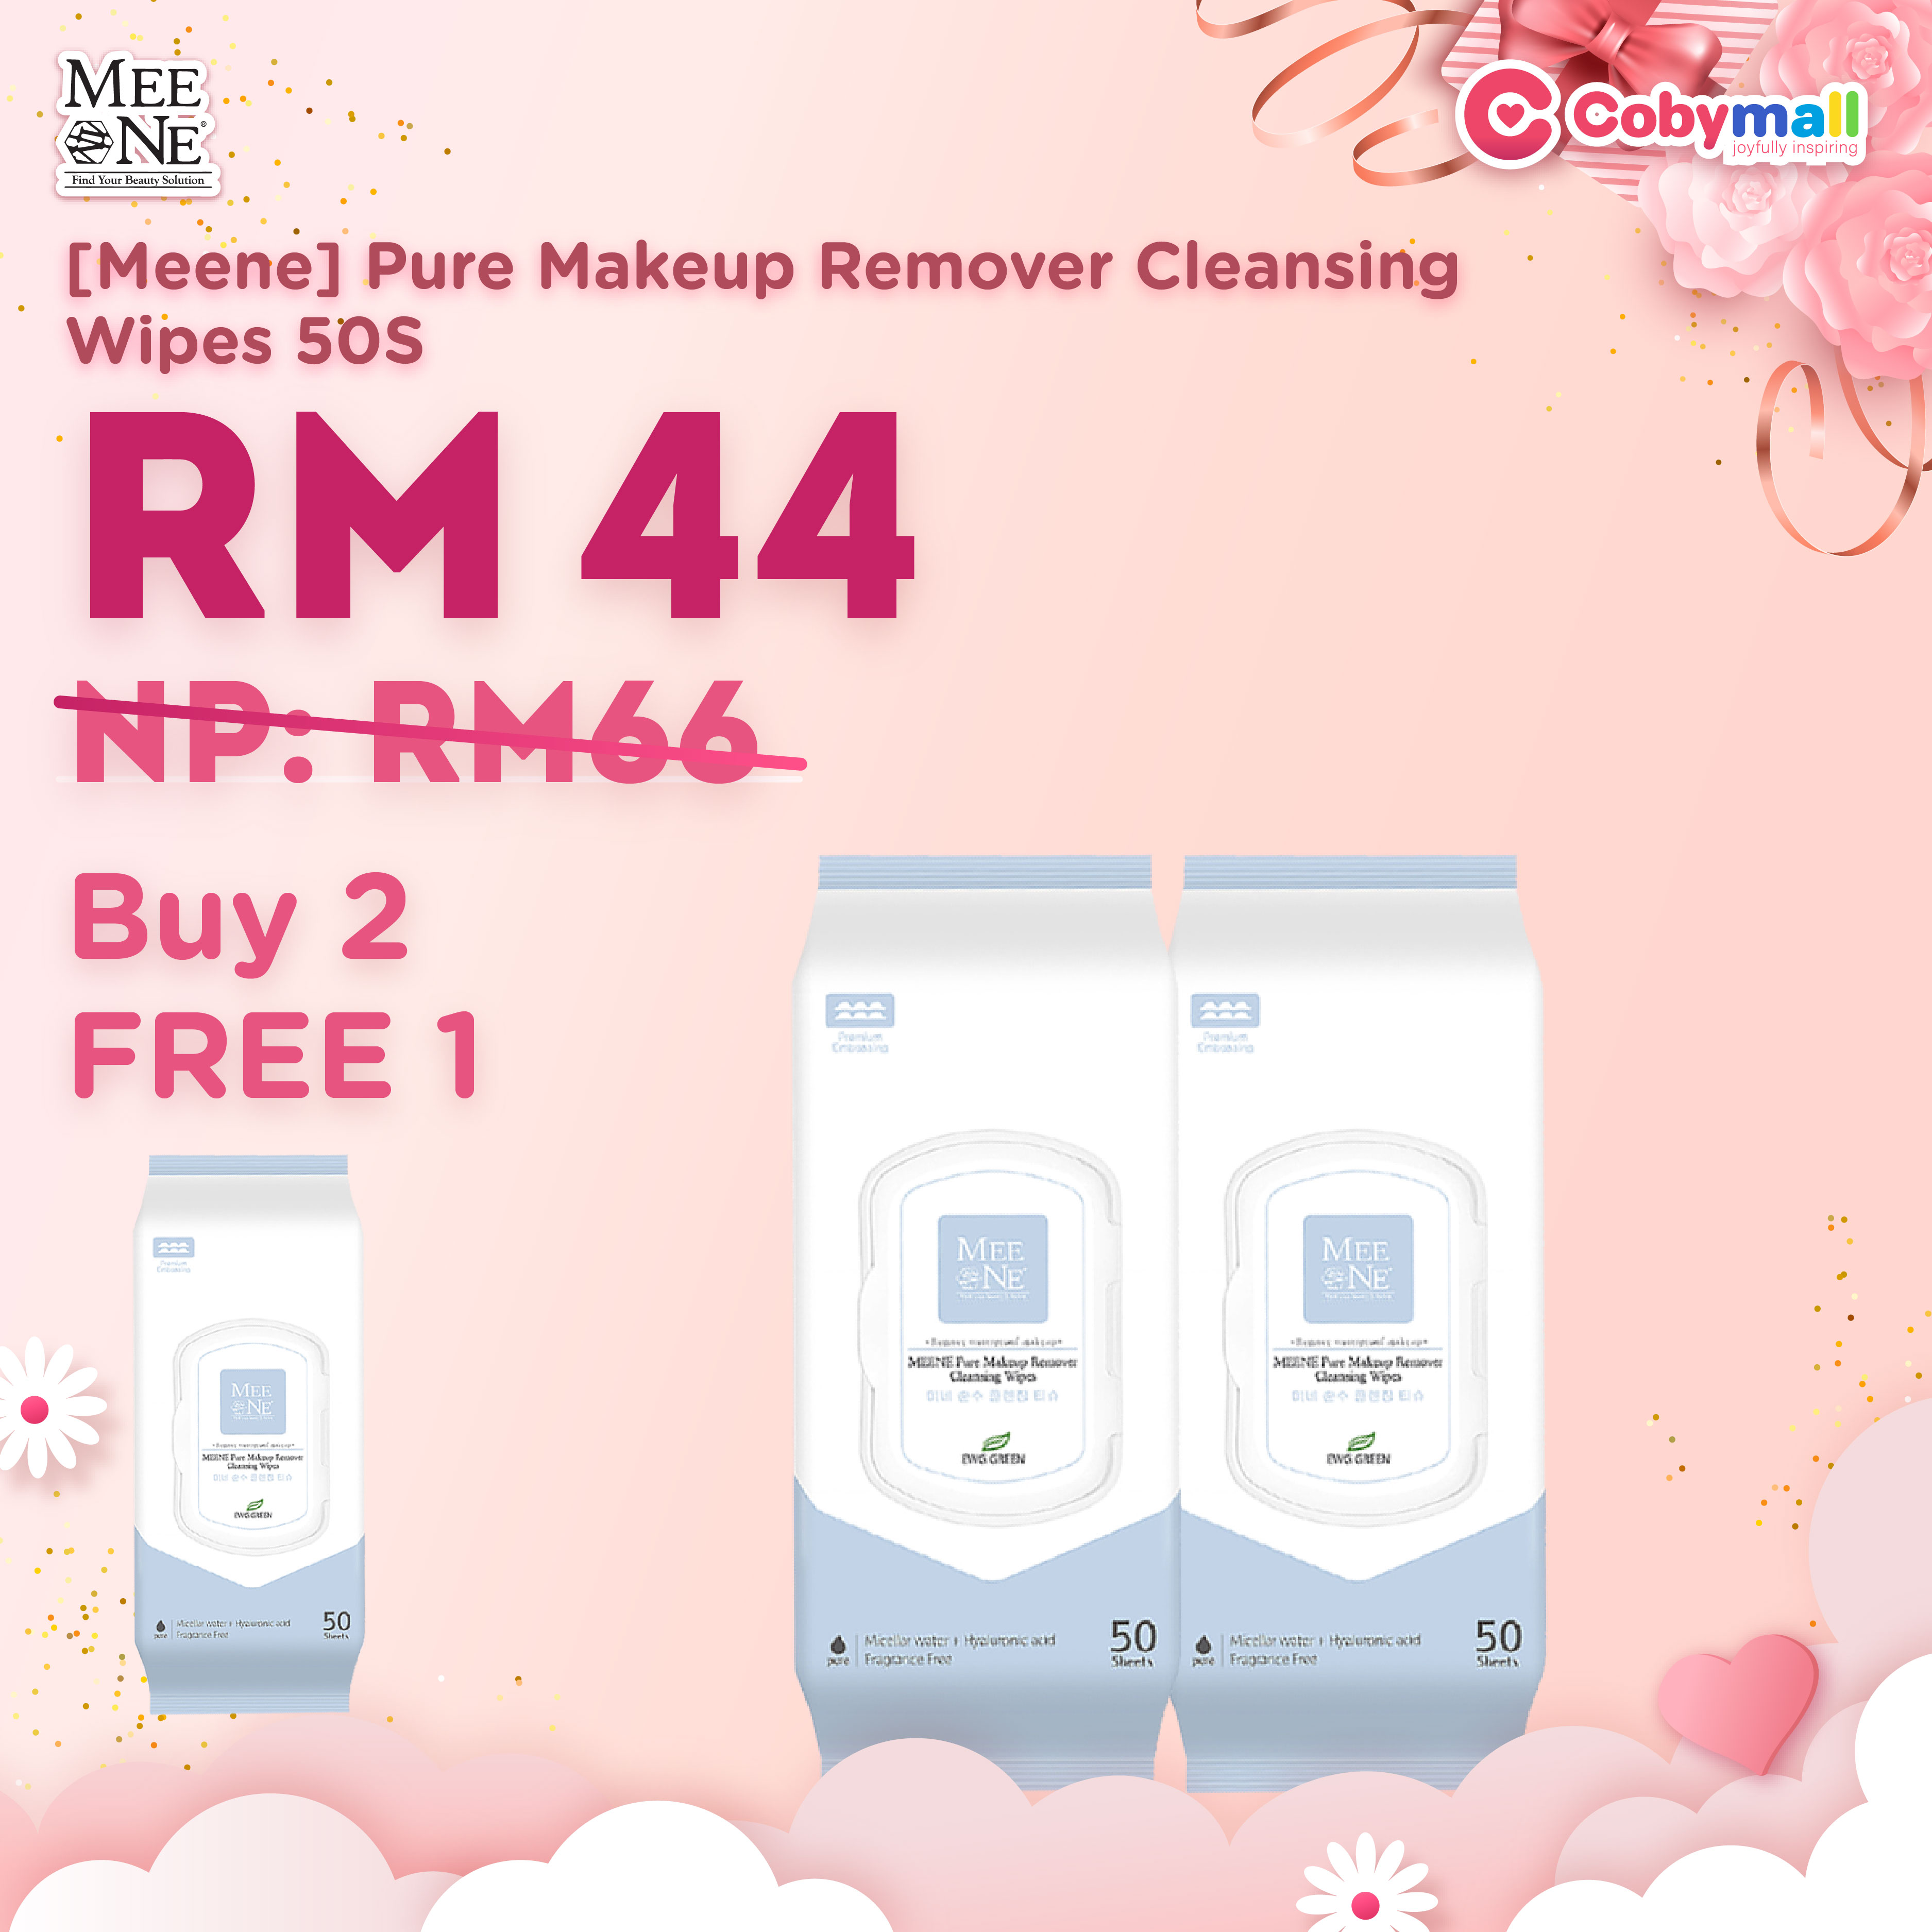 Women Days [Meene] Pure Makeup Remover Cleansing Wipes 50S (buy 2 free 1)